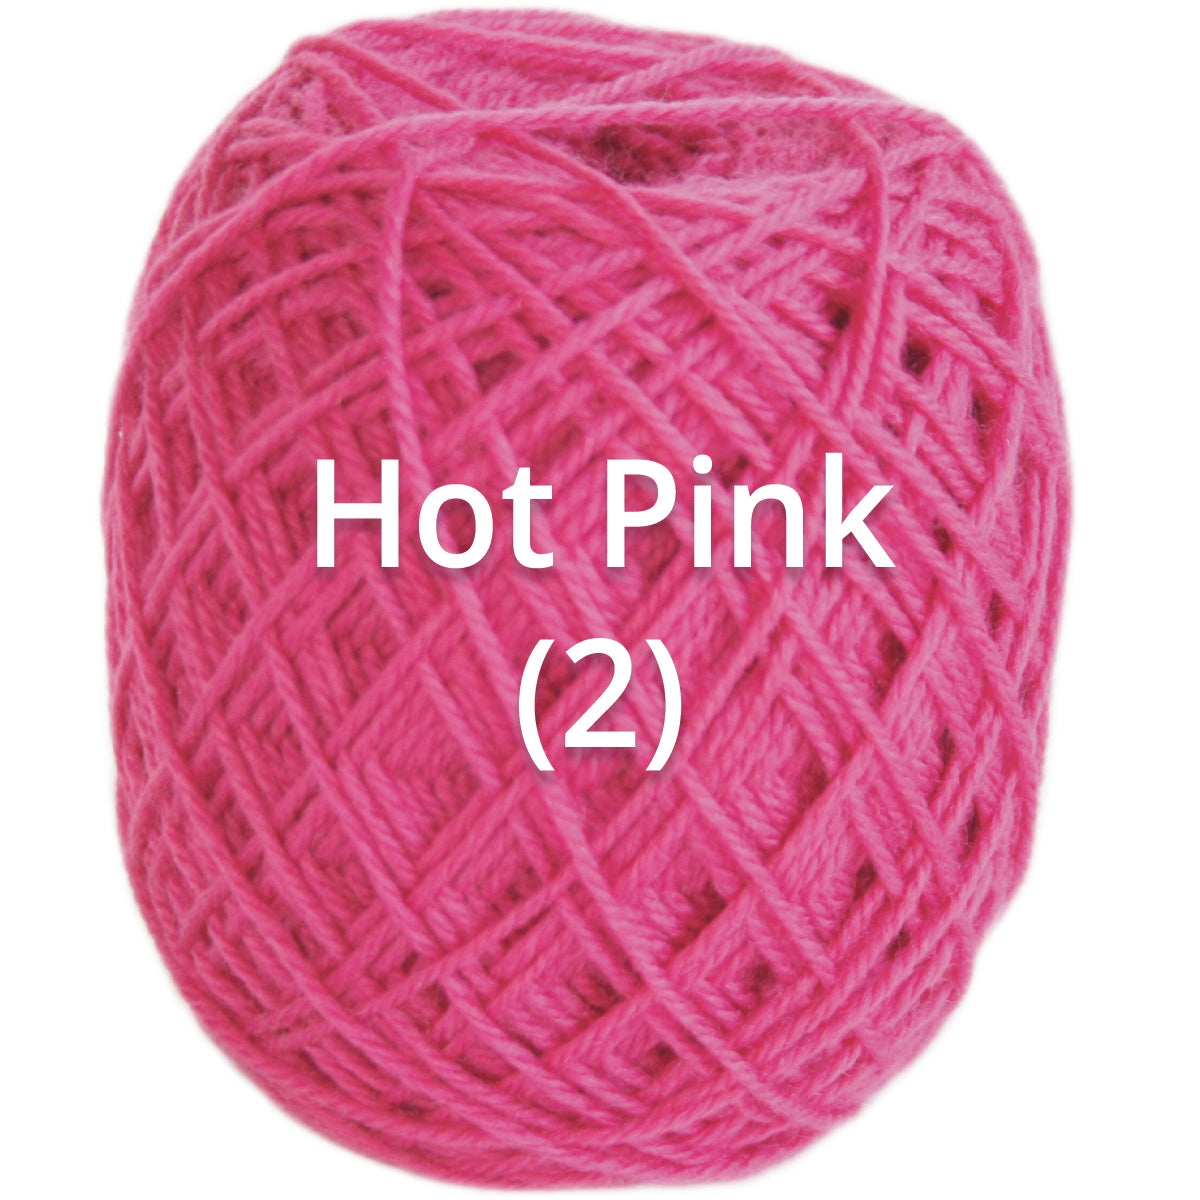 Hot Pink - Nundle Collection 4 Ply Sock Yarn